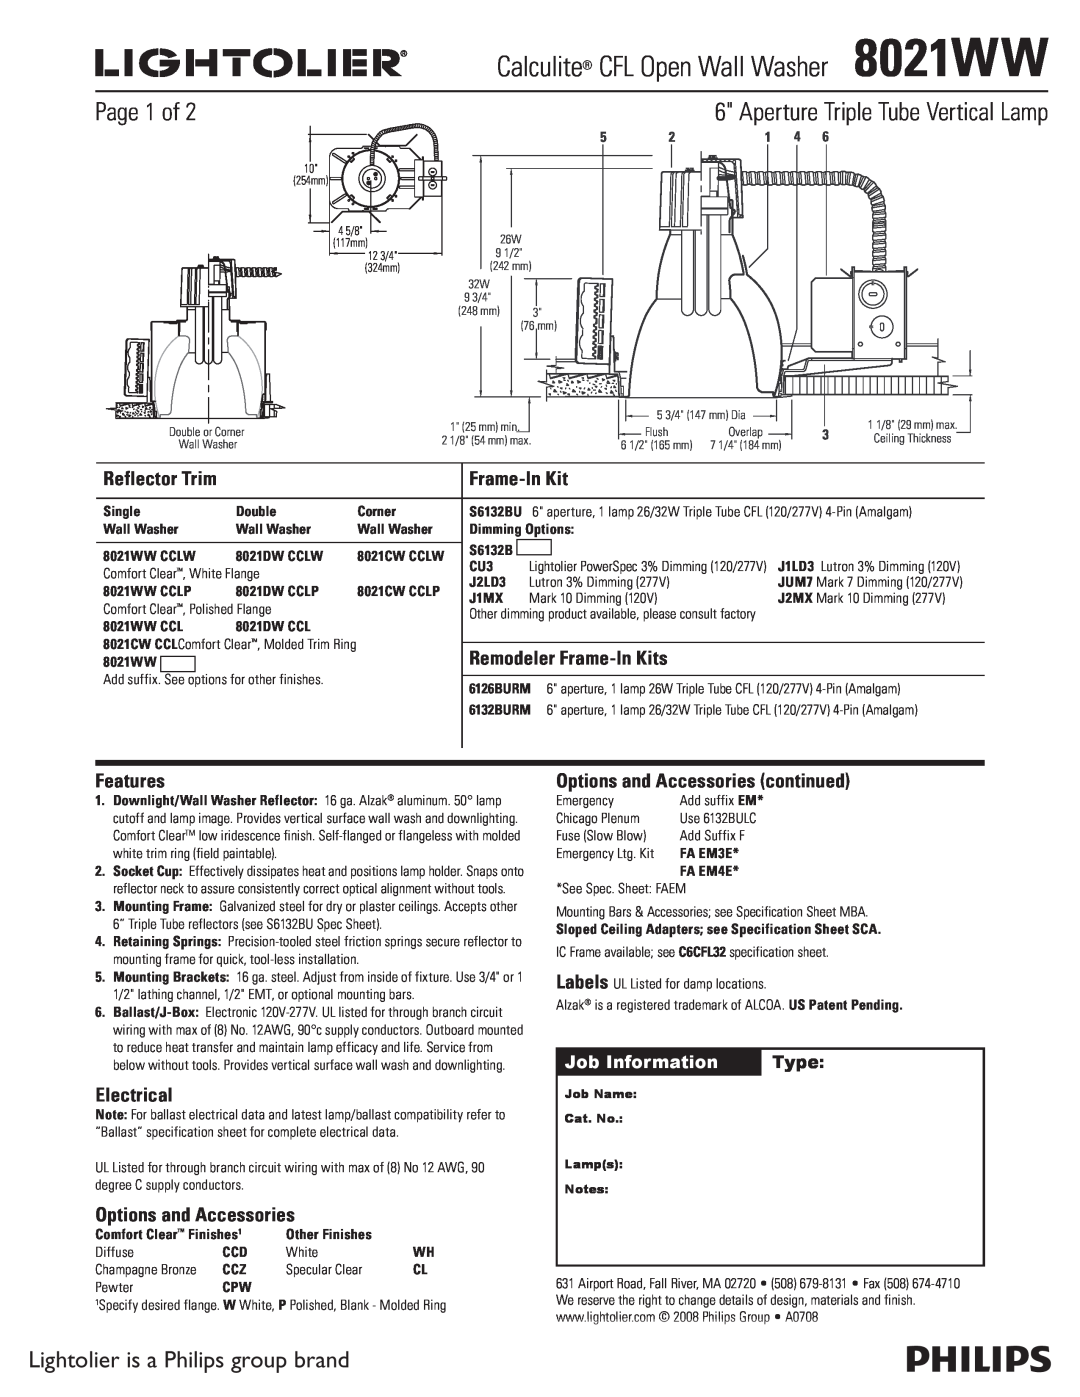 Lightolier 8021WW specifications Page 1 of, Aperture Triple Tube Vertical Lamp, Lightolier is a Philips group brand, Type 